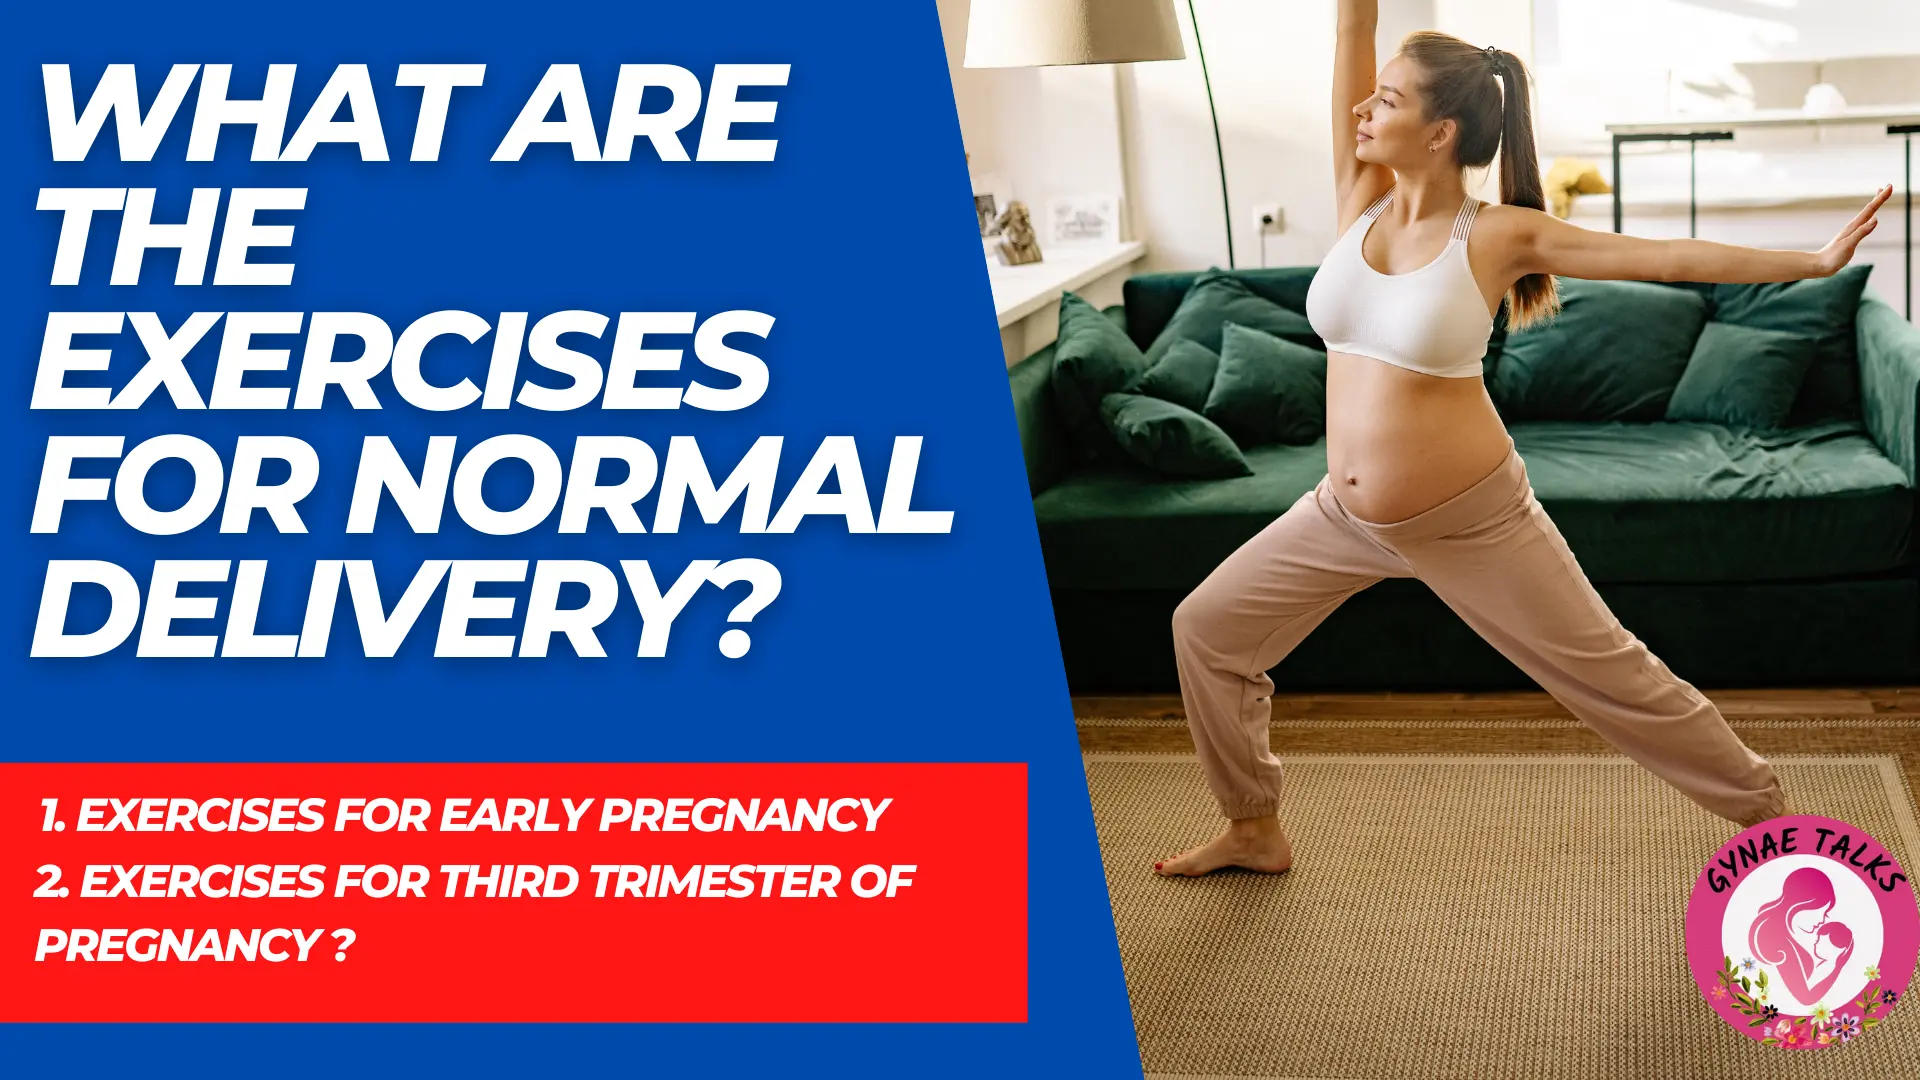 Exercises for normal delivery